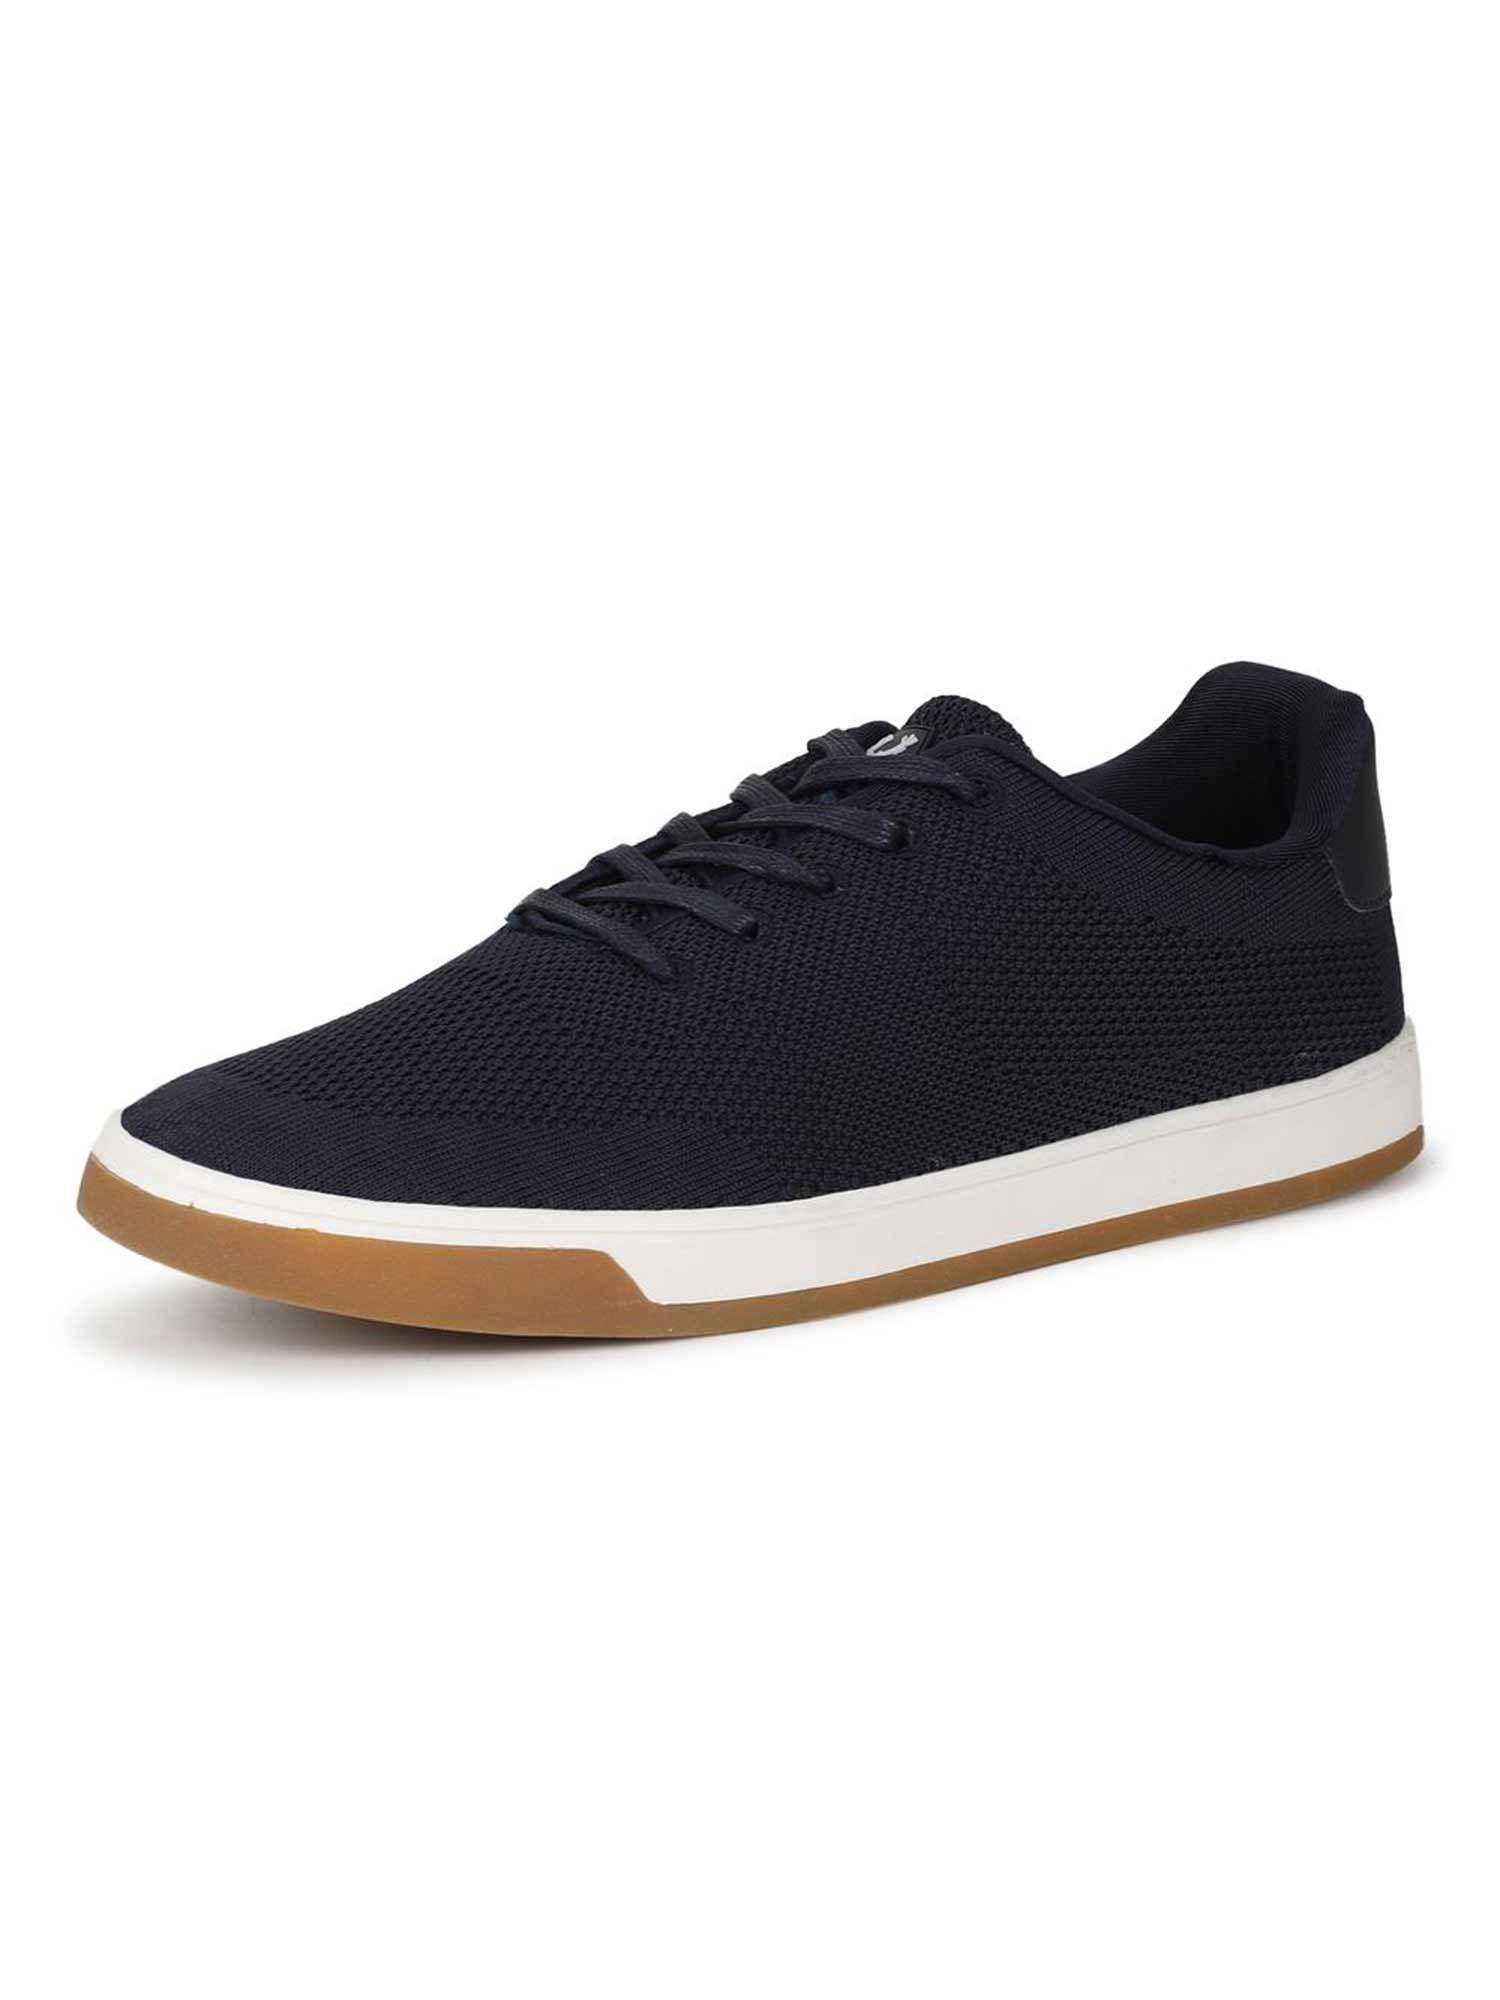 navy lace up shoes